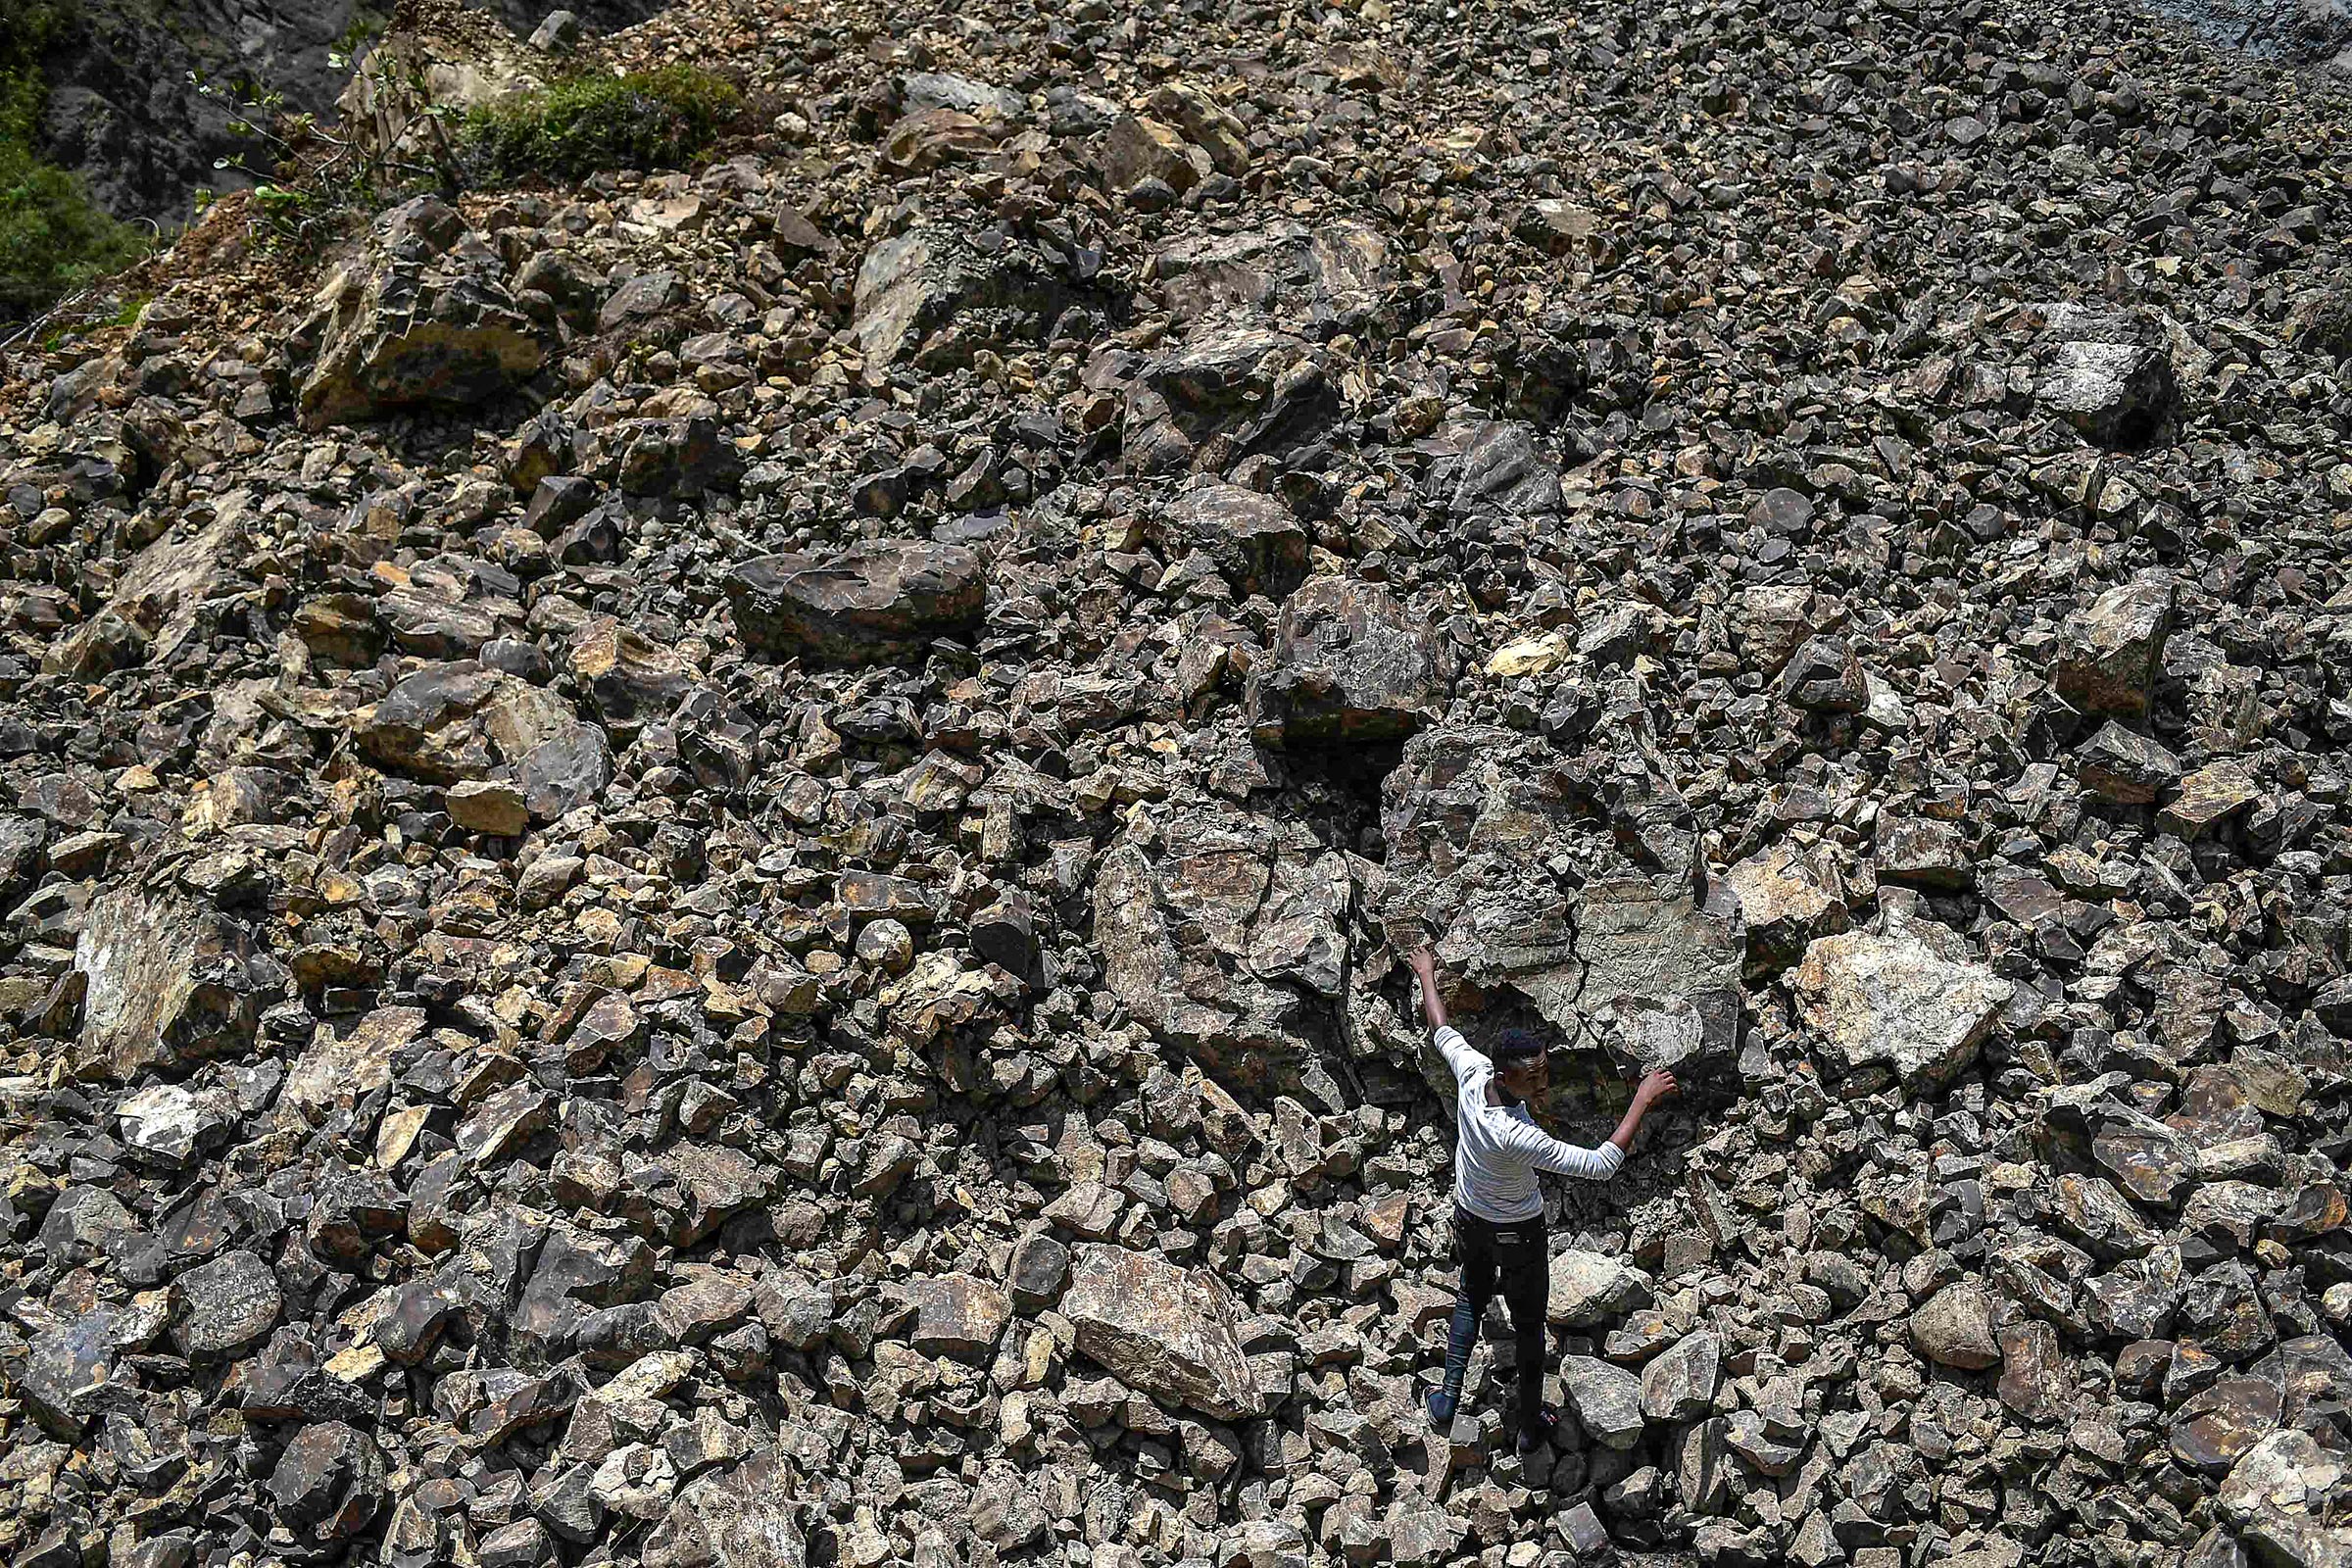 A man walks over rubble that covered a road during a landslide triggered by the earthquake in River Glass on Aug. 18.